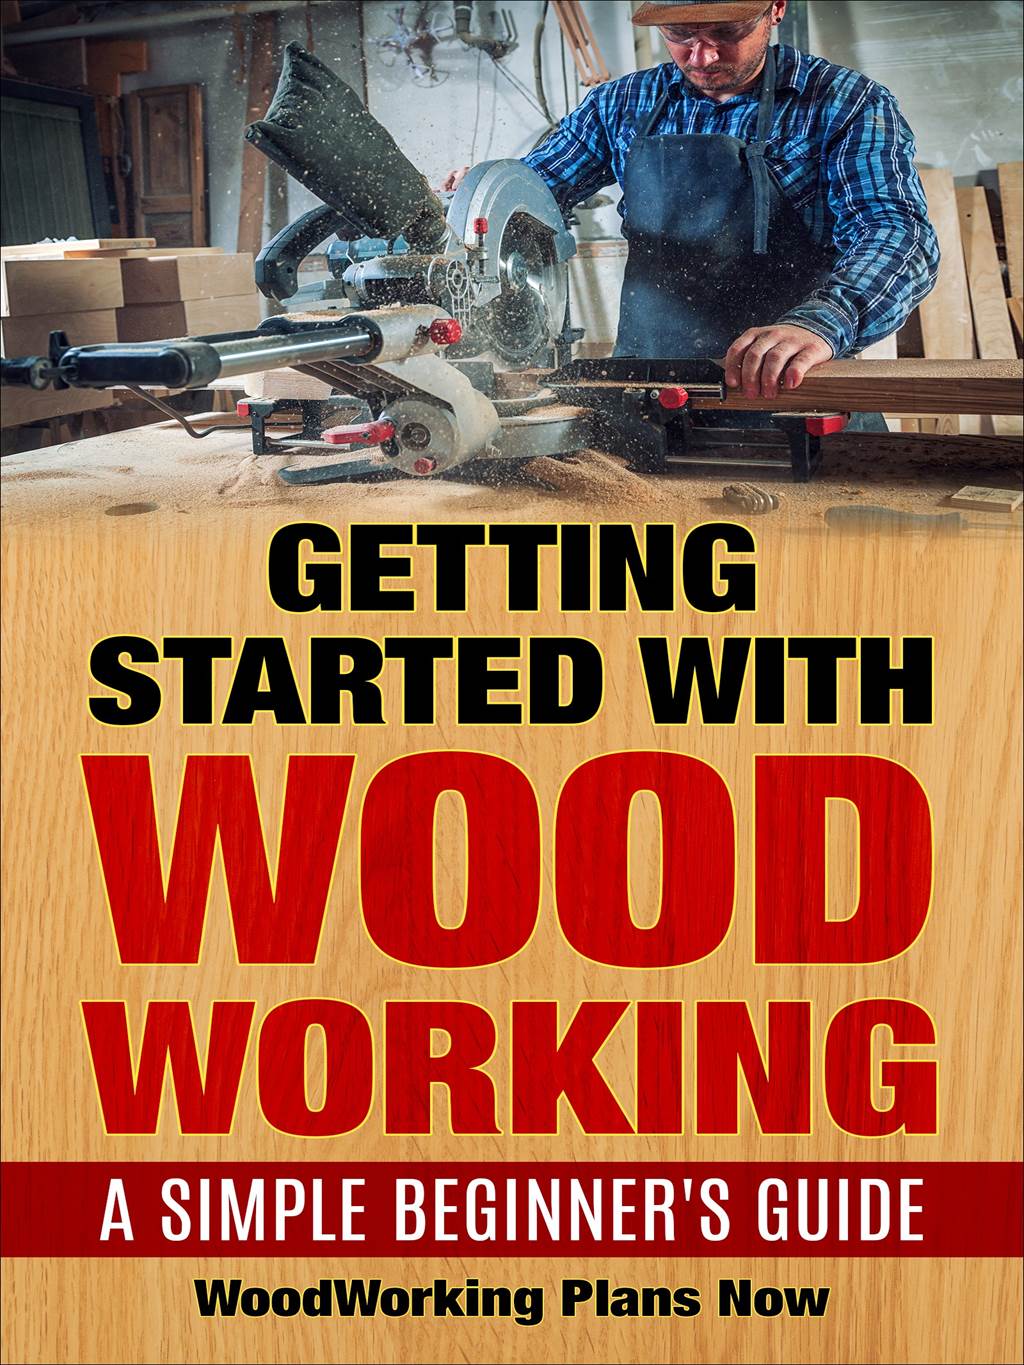 Teds Woodworking Reviews Real Customer Responses Should You Invest In These Woodworking Plans? Must Read Guide